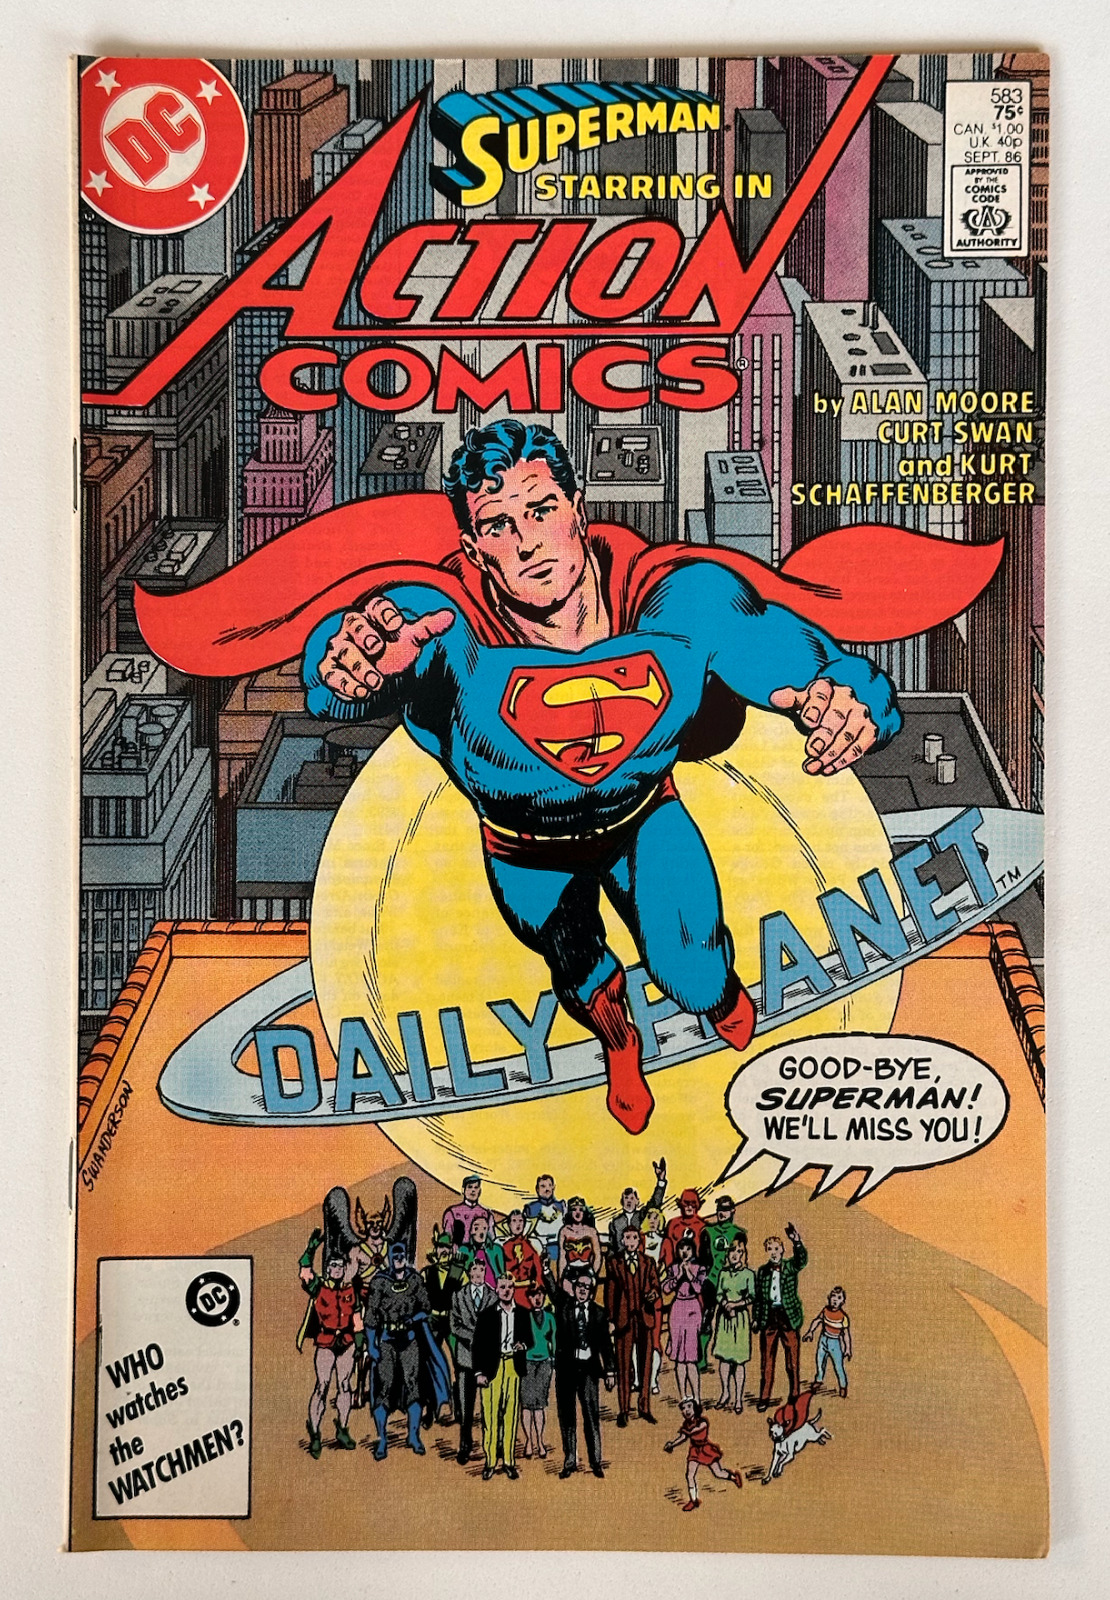 Superman Starring in Action Comics Issue # 583 1st Appearance of Jonathan Elliot